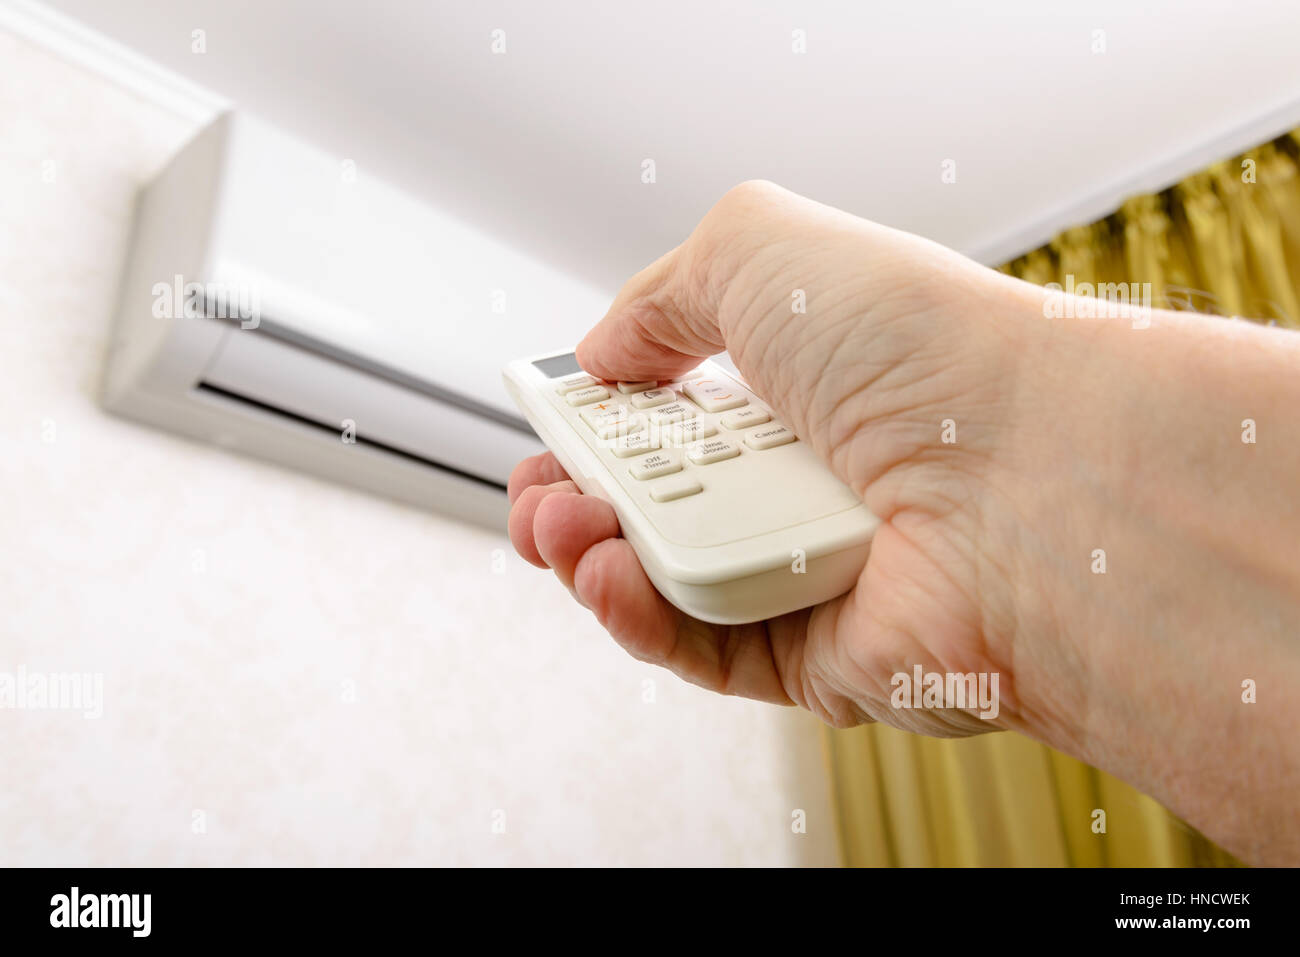 A man holds a remote control in his hand to pilot a wall-mounted air conditioner Stock Photo